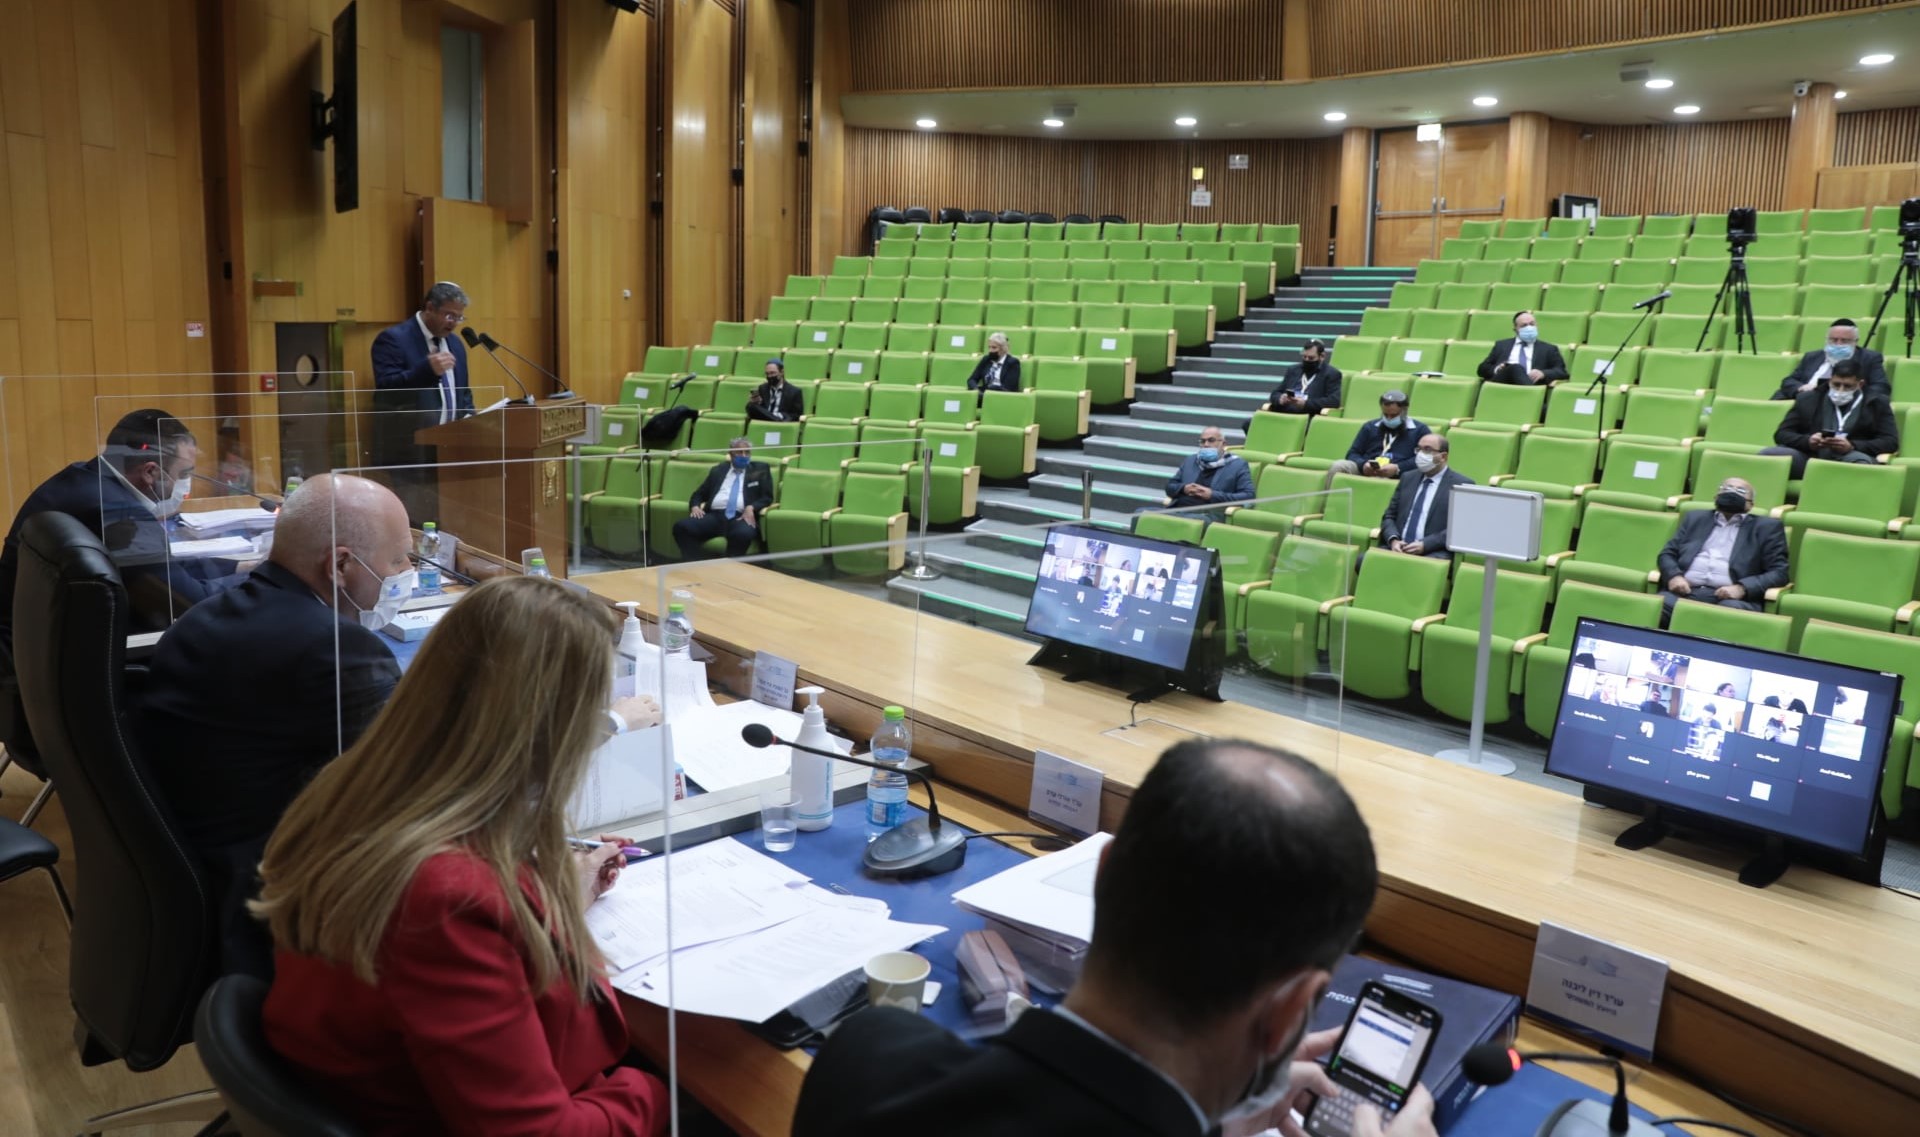 The Central Elections Committee convened in Jerusalem on Wednesday, February 17, to debate and vote on the disqualification petitions submitted by Otzma Yehudit aimed at delegitimizing Arab representation in Israel's Knesset.